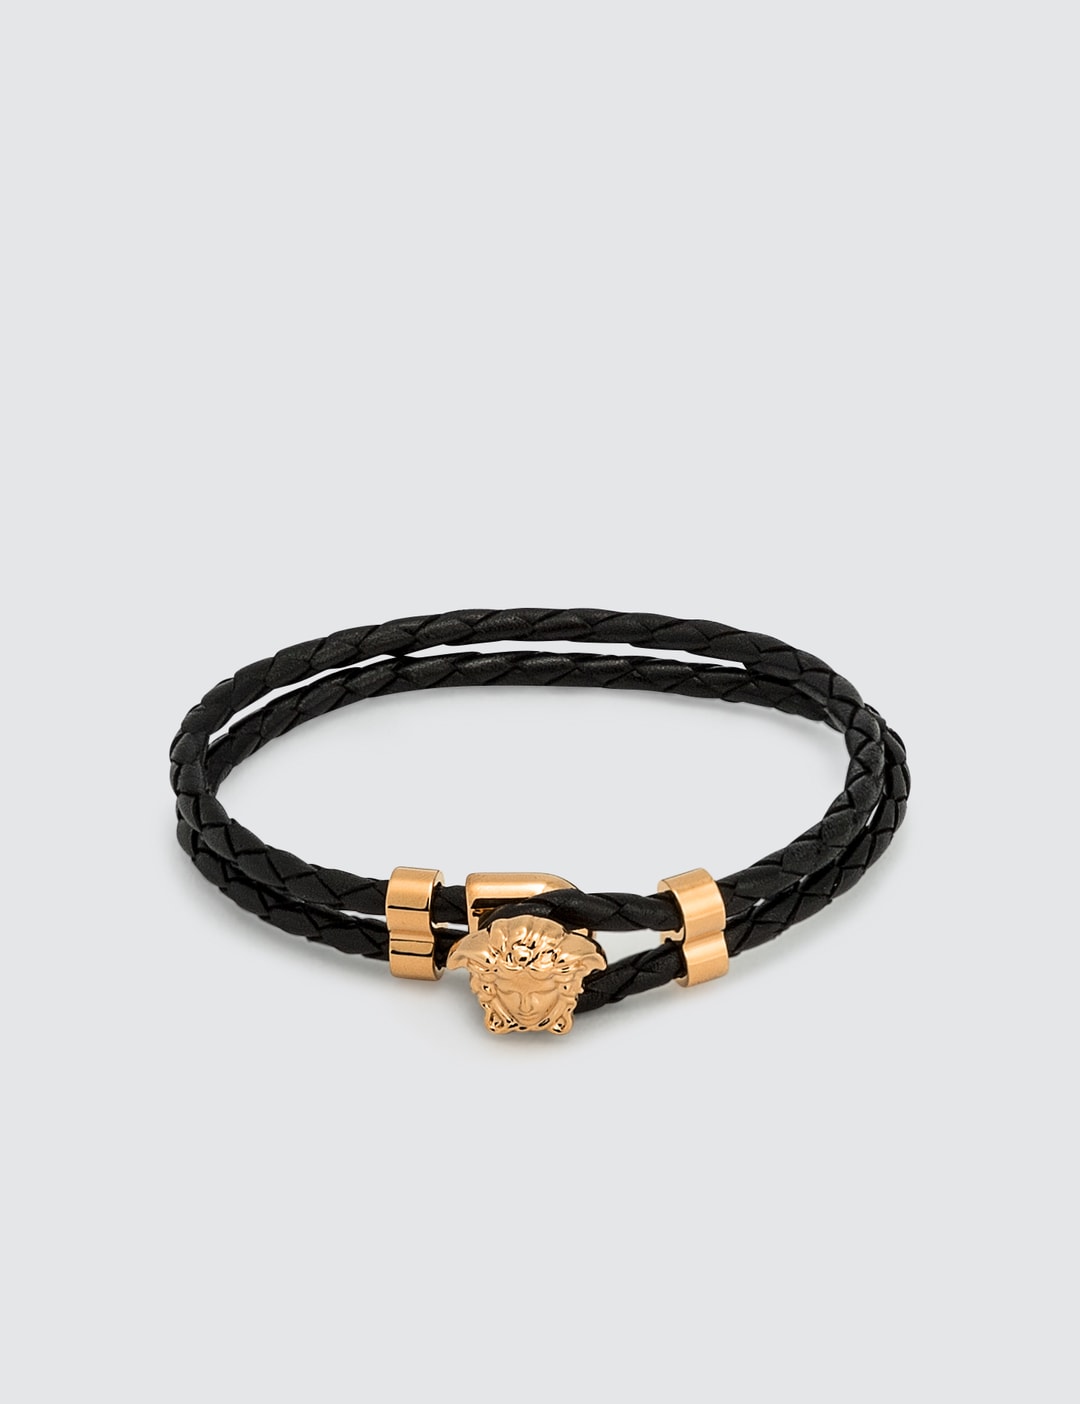 Versace - Medusa Leather Bracelet | HBX - Globally Curated Fashion and ...